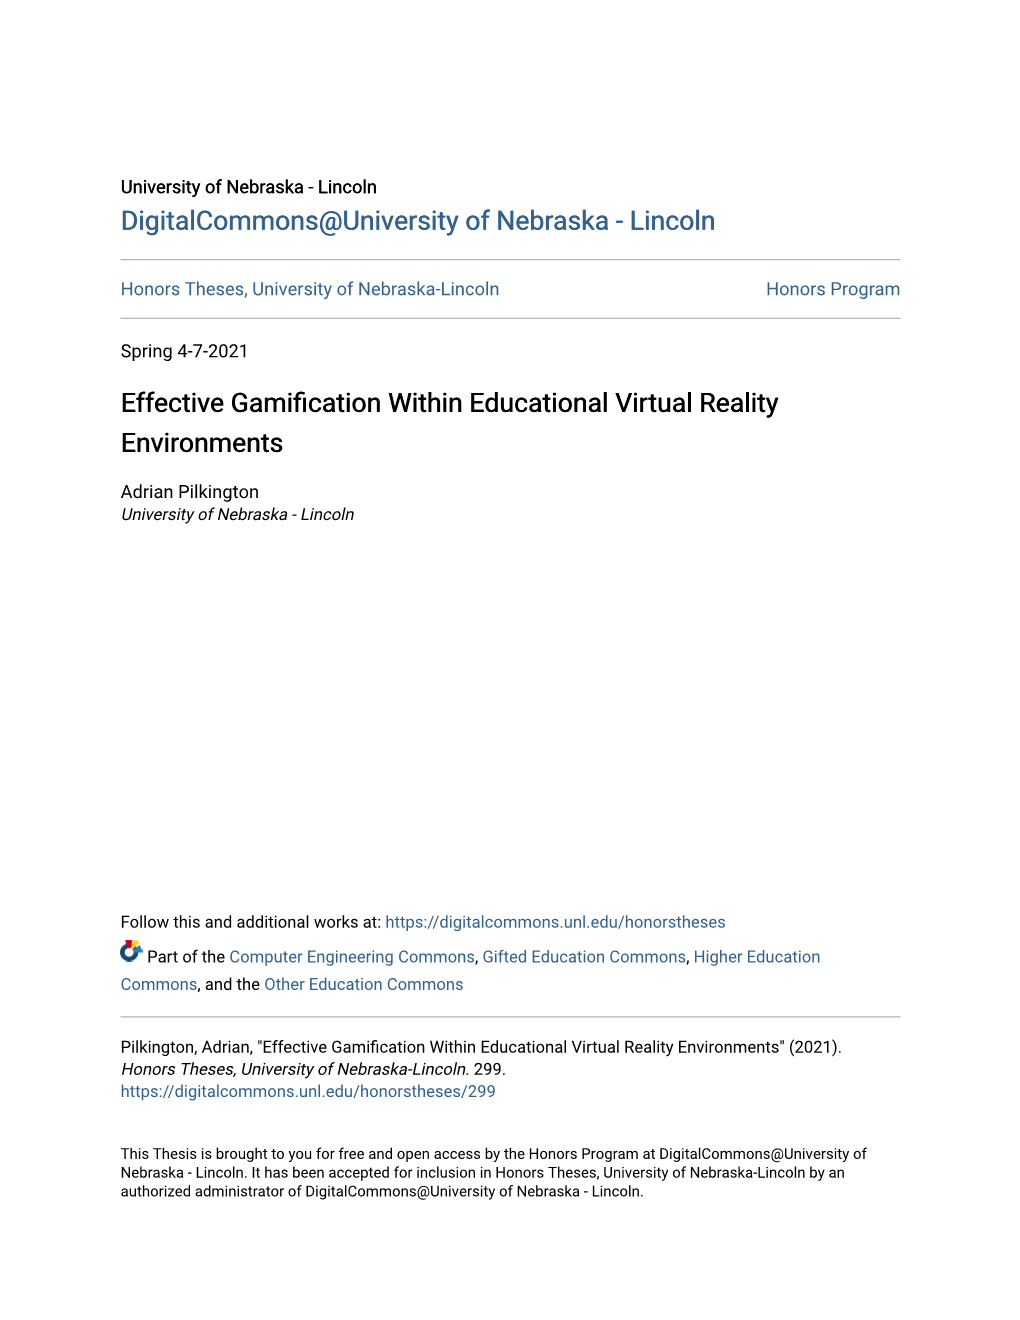 Effective Gamification Within Educational Virtual Reality